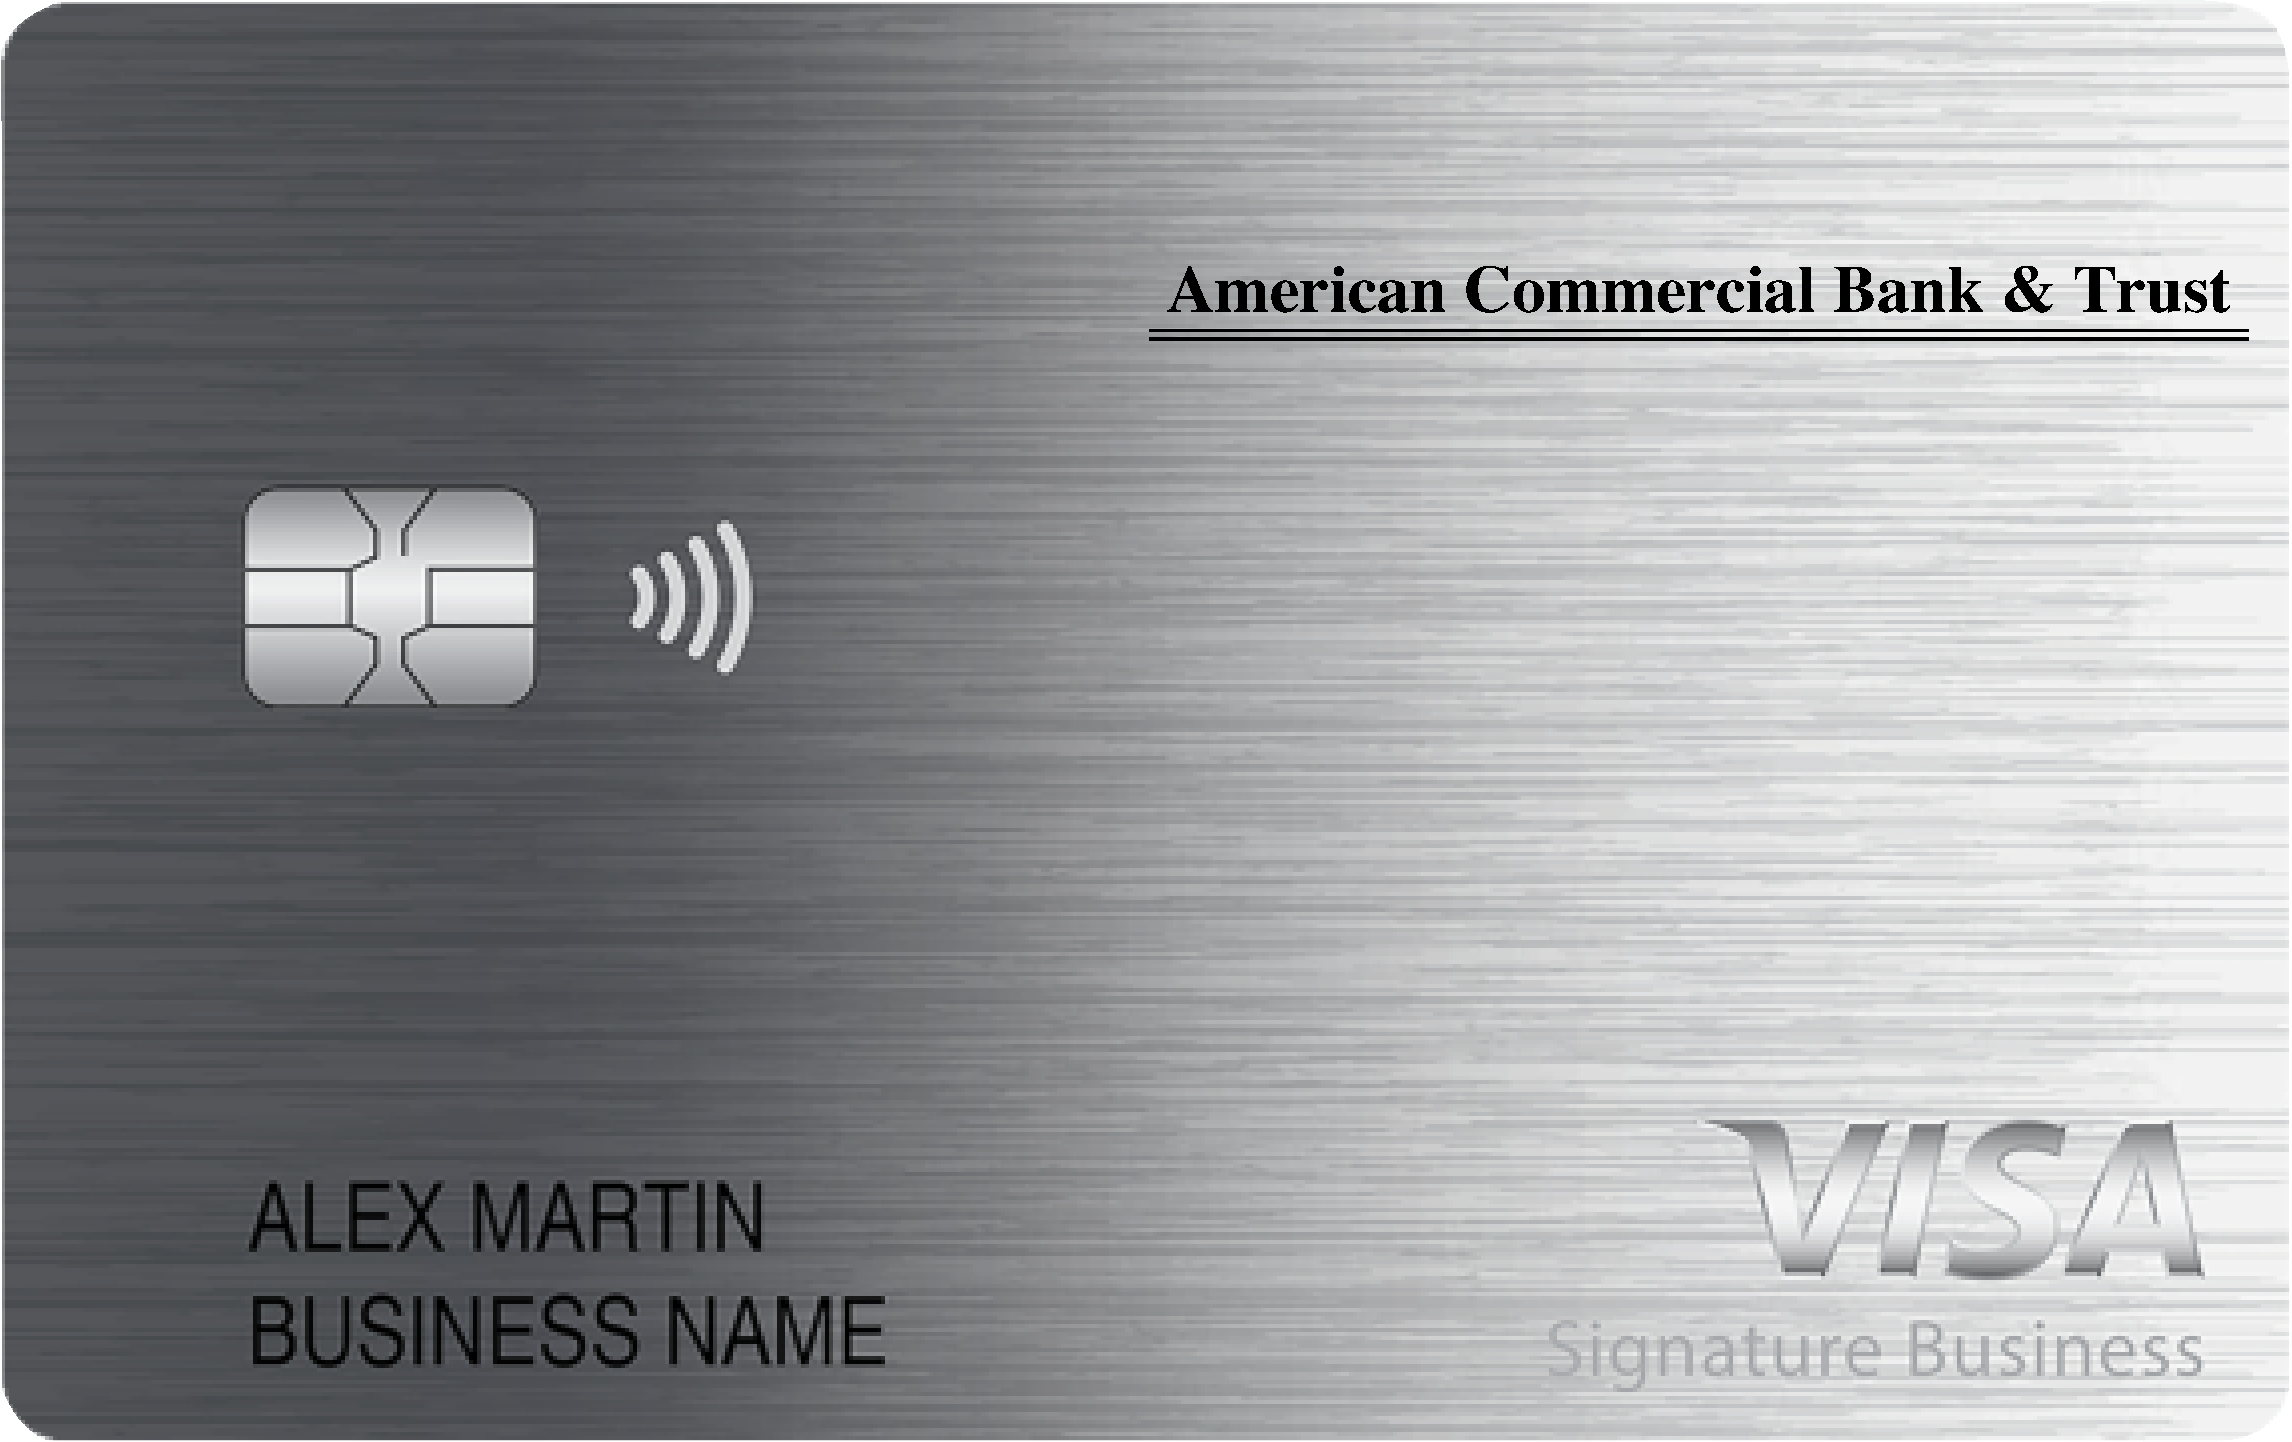 American Commercial Bank & Trust Smart Business Rewards Card